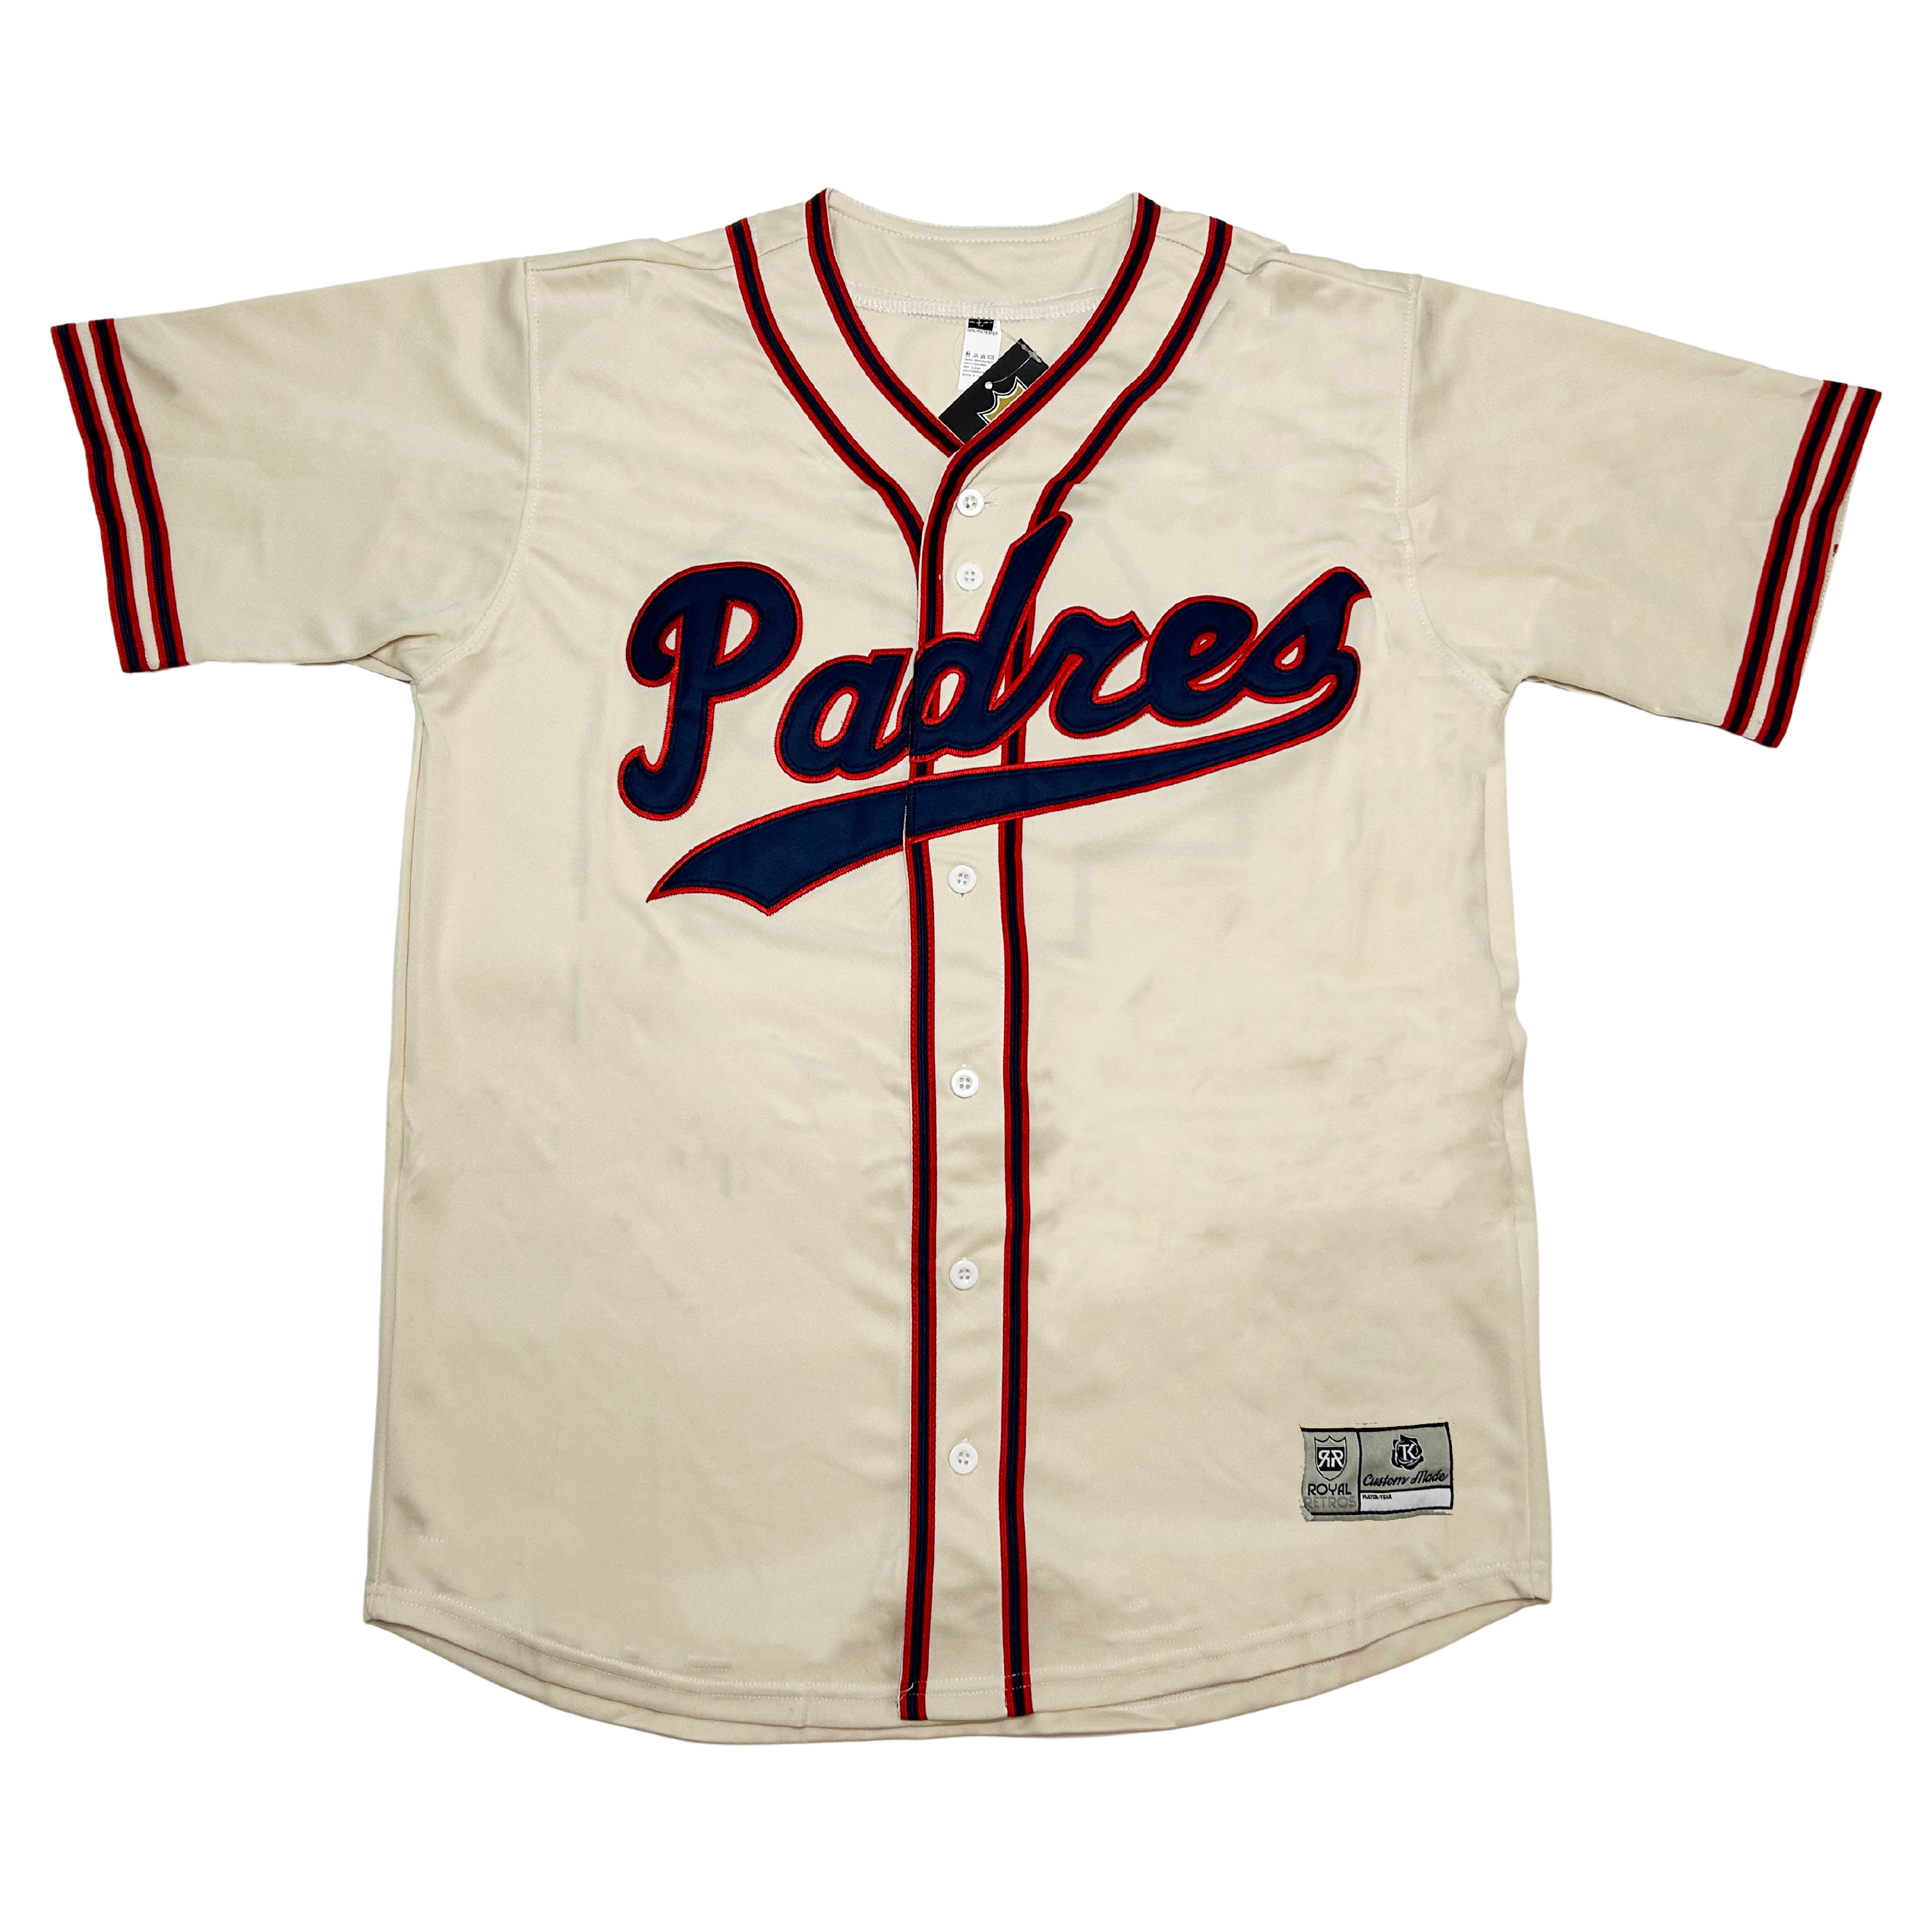 Padres player jersey